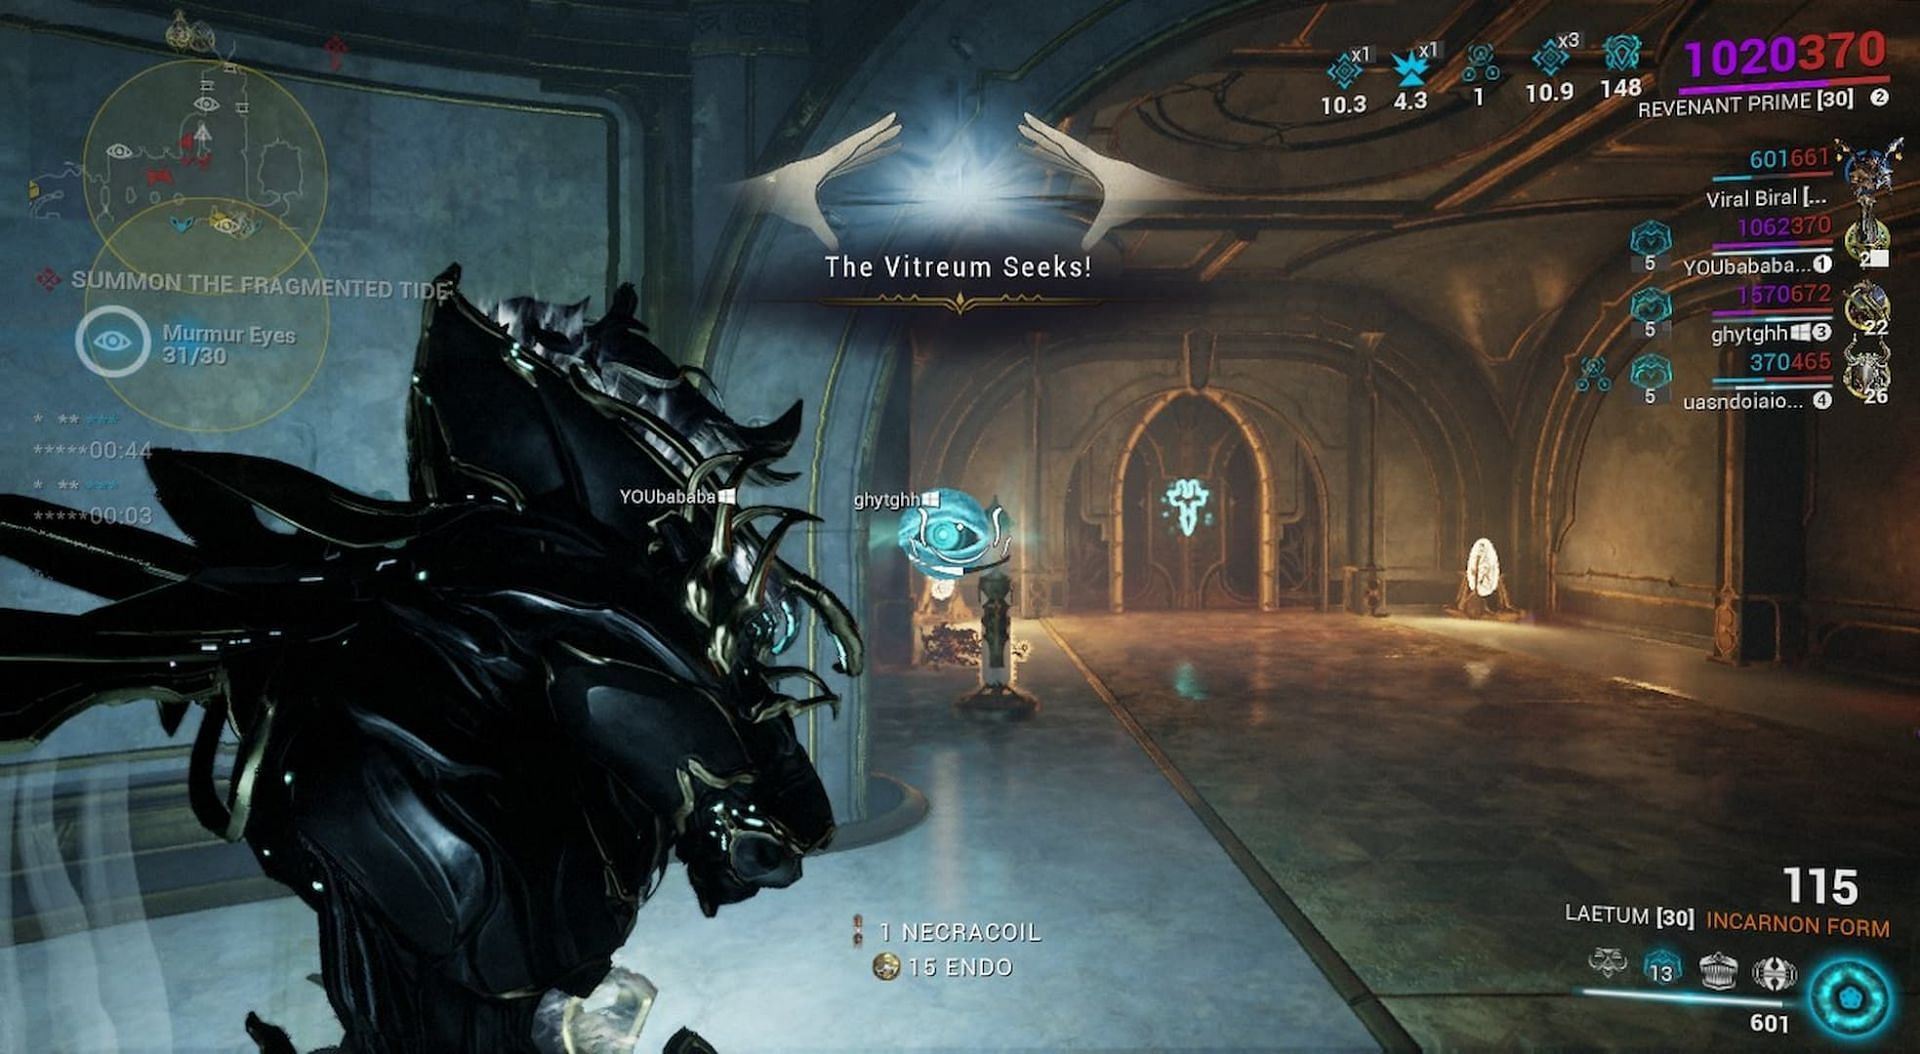 You must collect Murmur Eyes to summon the Fragmeted boss in Warframe (Image via Digital Extremes)